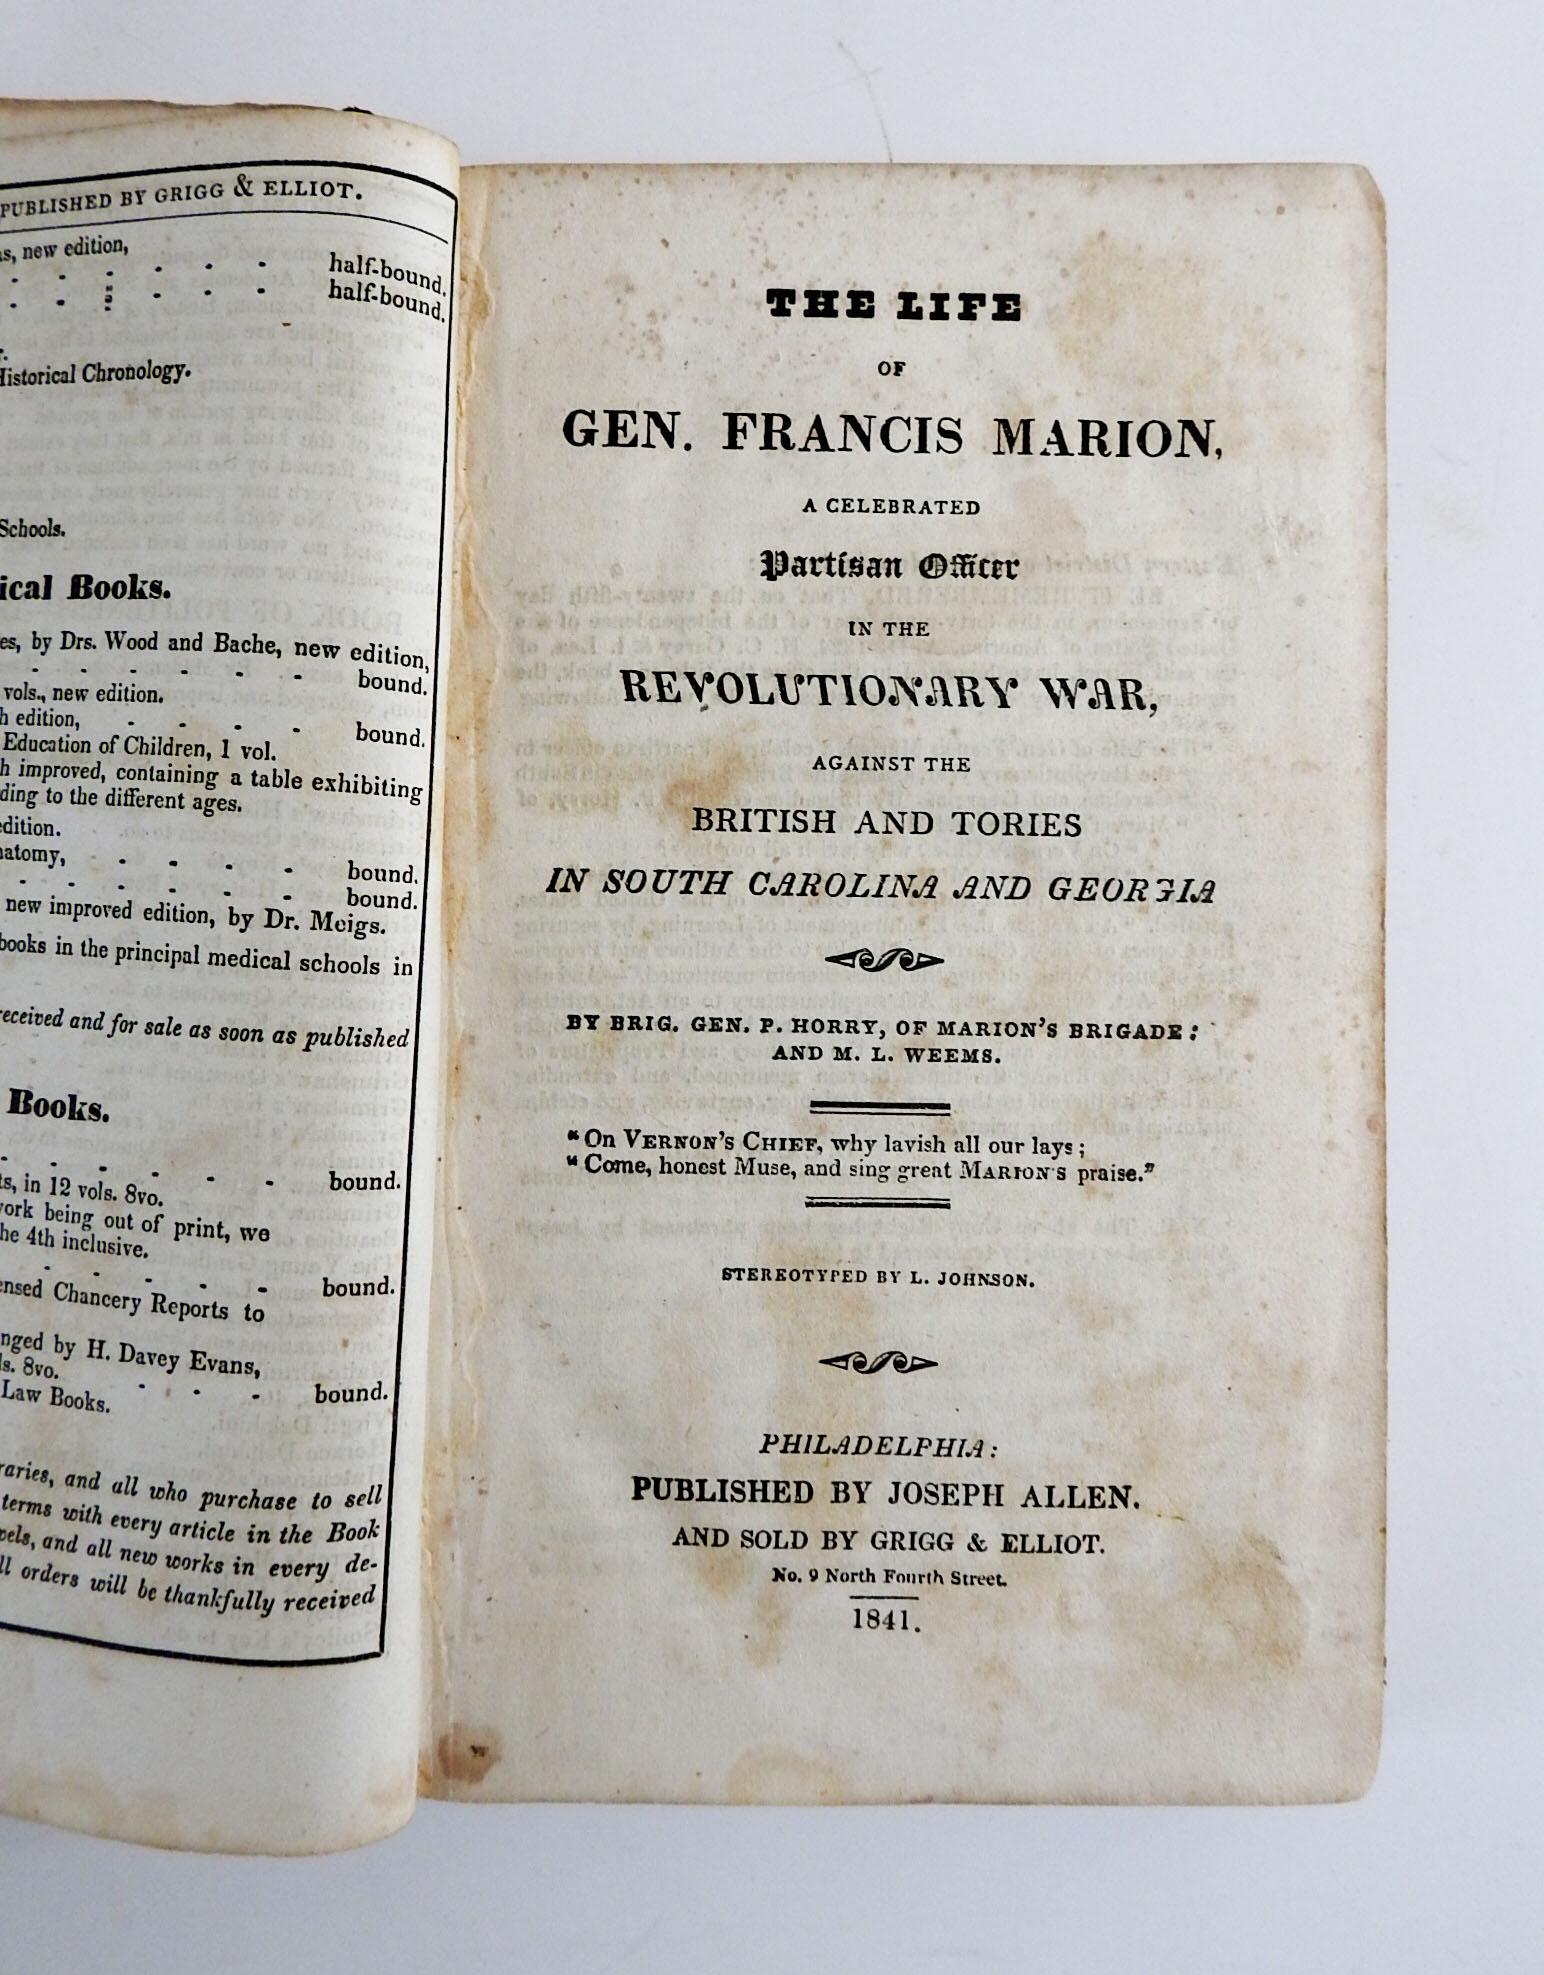 The Life of Gen. Francis Marion : A celebrated officer in the revolutionary war against the British in South Carolina and Georgia by M L Weems, Peter Horry. Published by Joseph Allen, Philadelphia, 1841. Francis Marion, also known as the Swamp Fox,